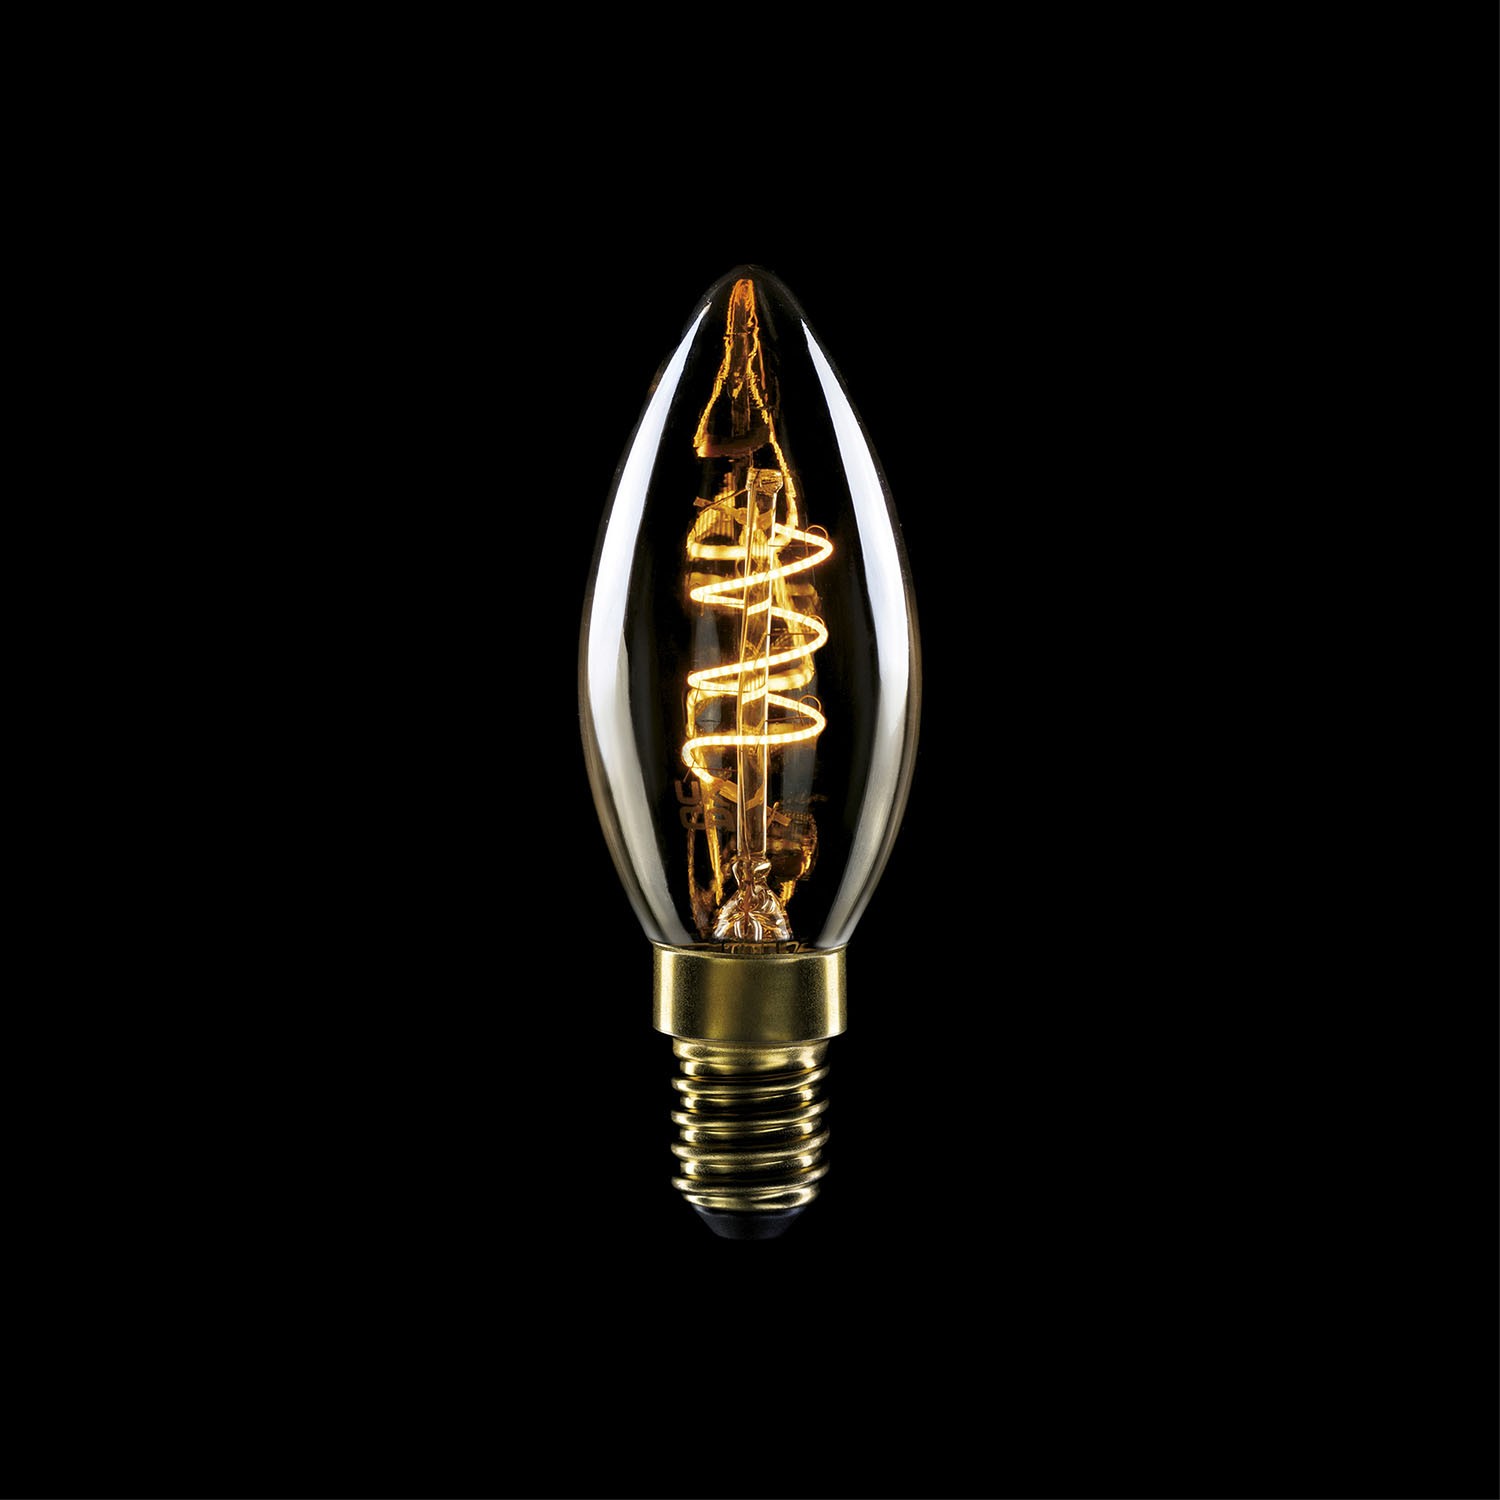 LED Golden Light Bulb Carbon Line Curved Spiral Filament Candle C35 2,5W 136Lm E14 1800K Dimmable - C01